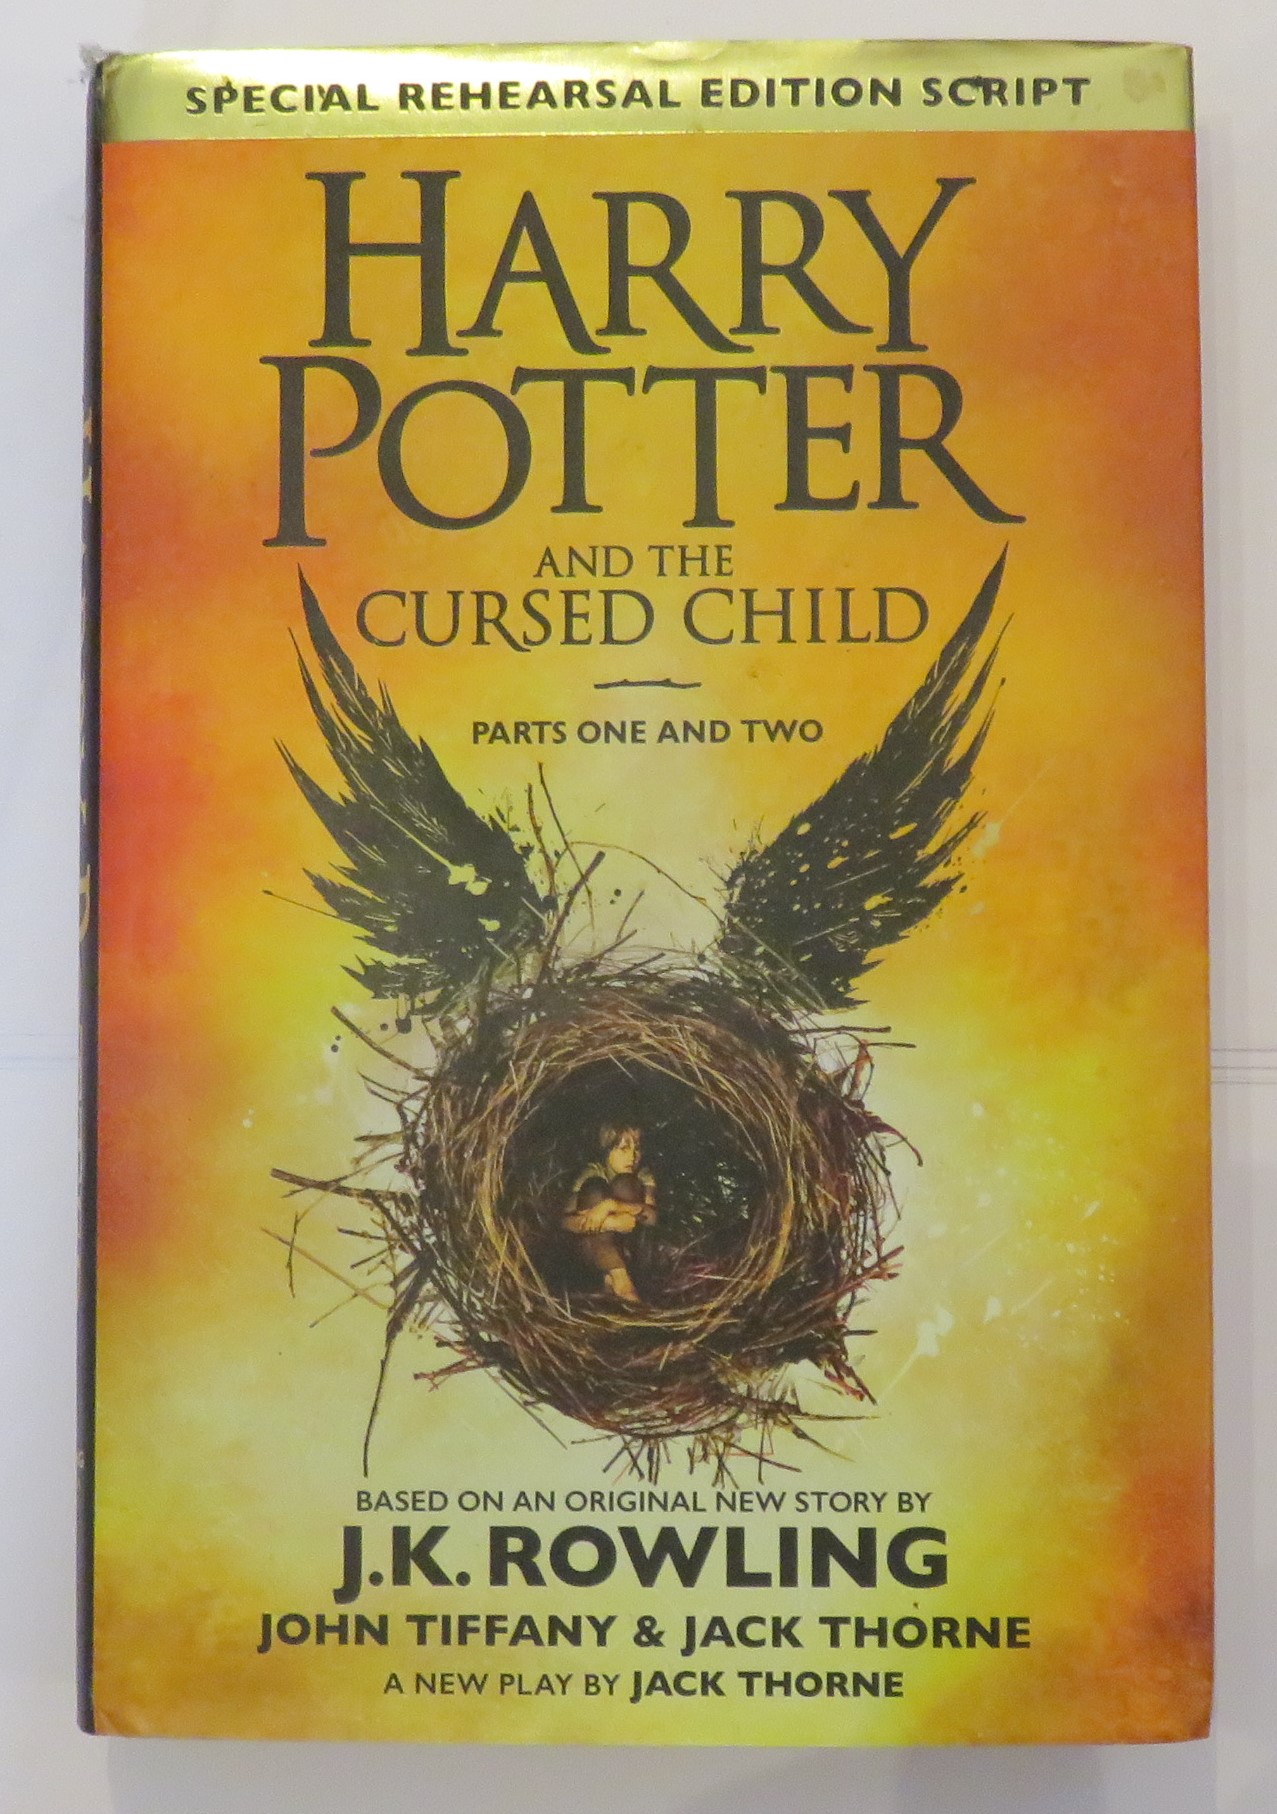 Harry Potter and the Cursed Child First Edition